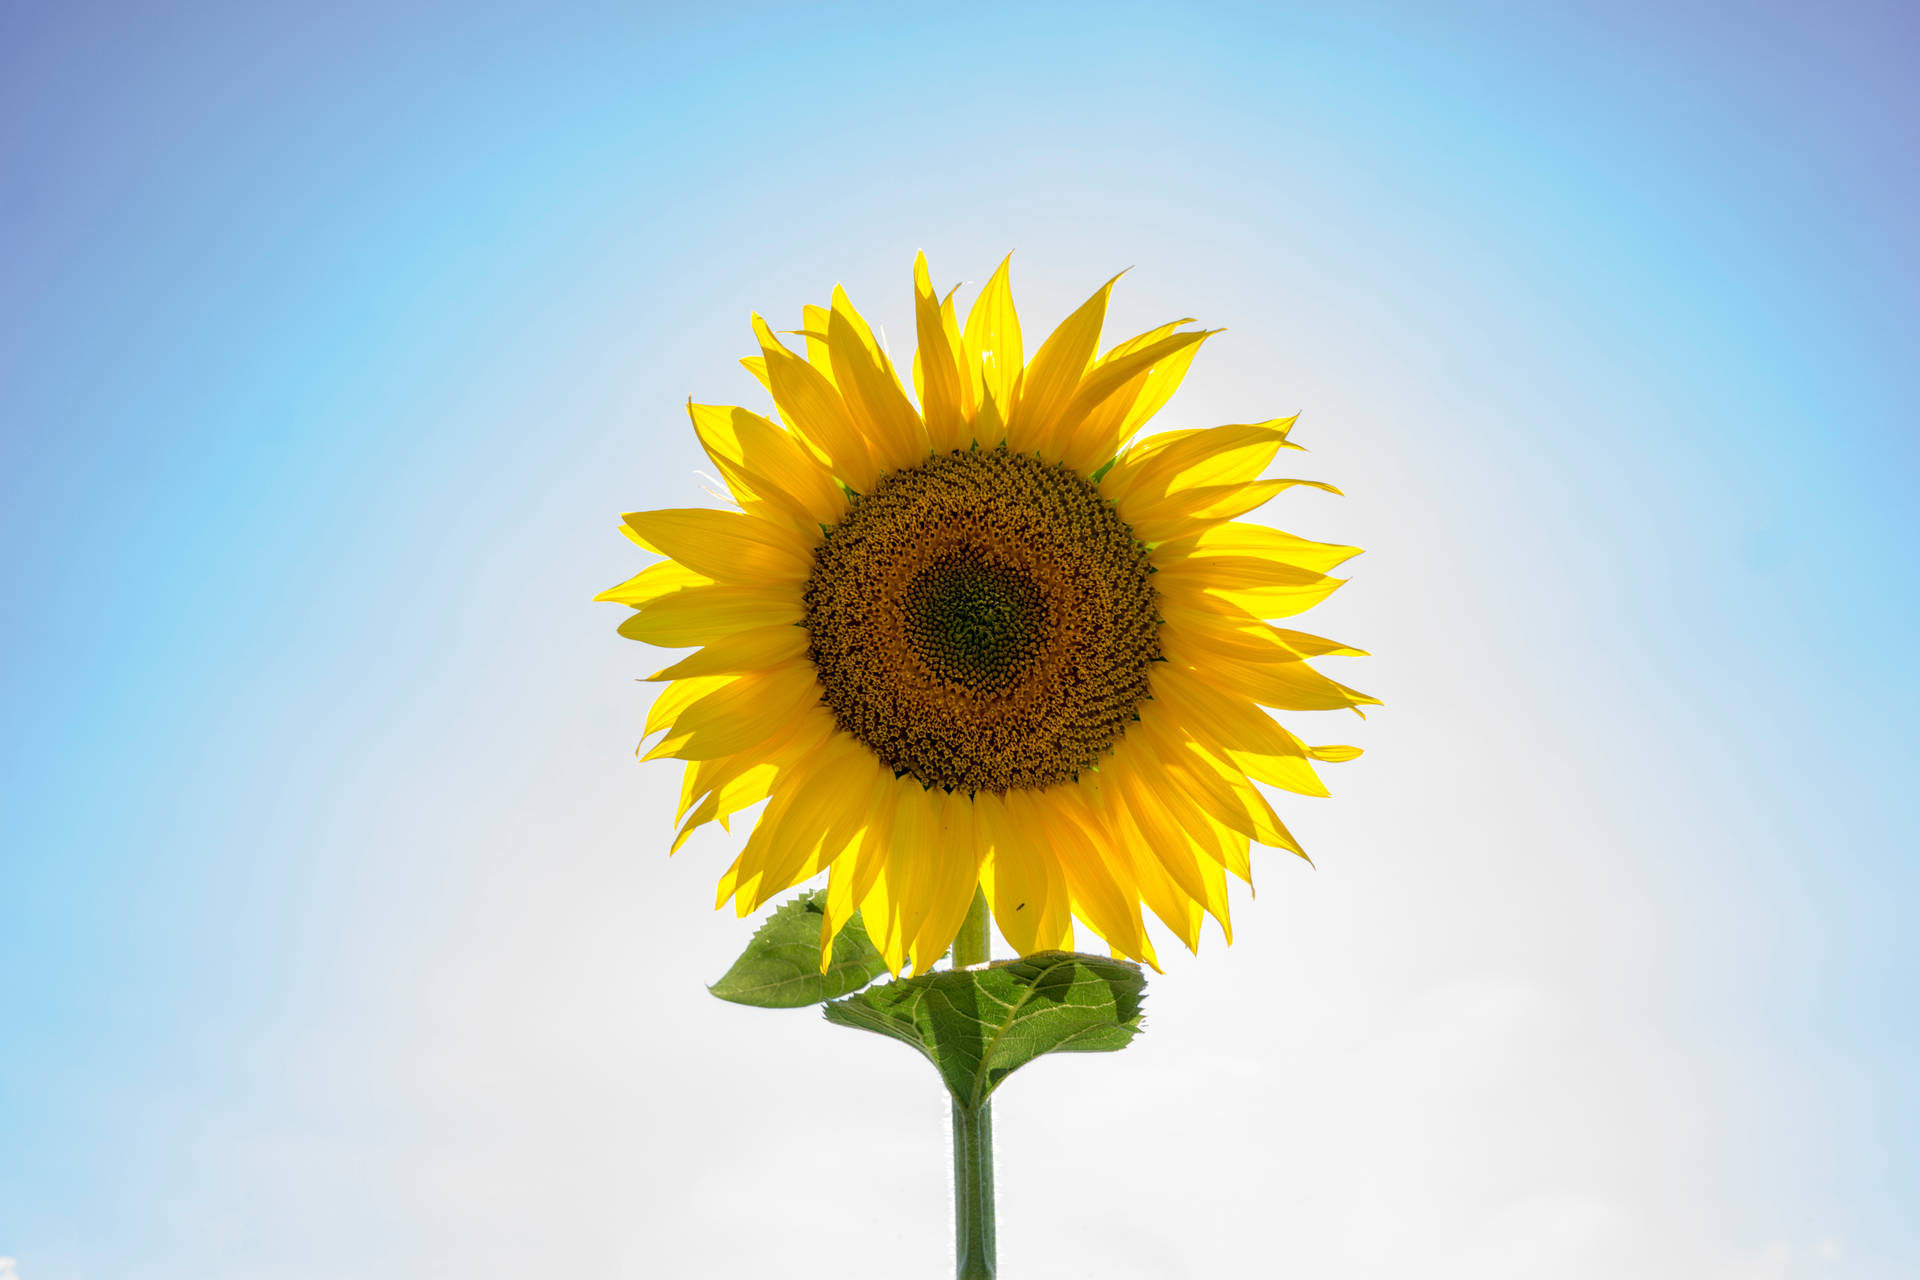 Giant Sunflower On A Sunny Day Wallpaper